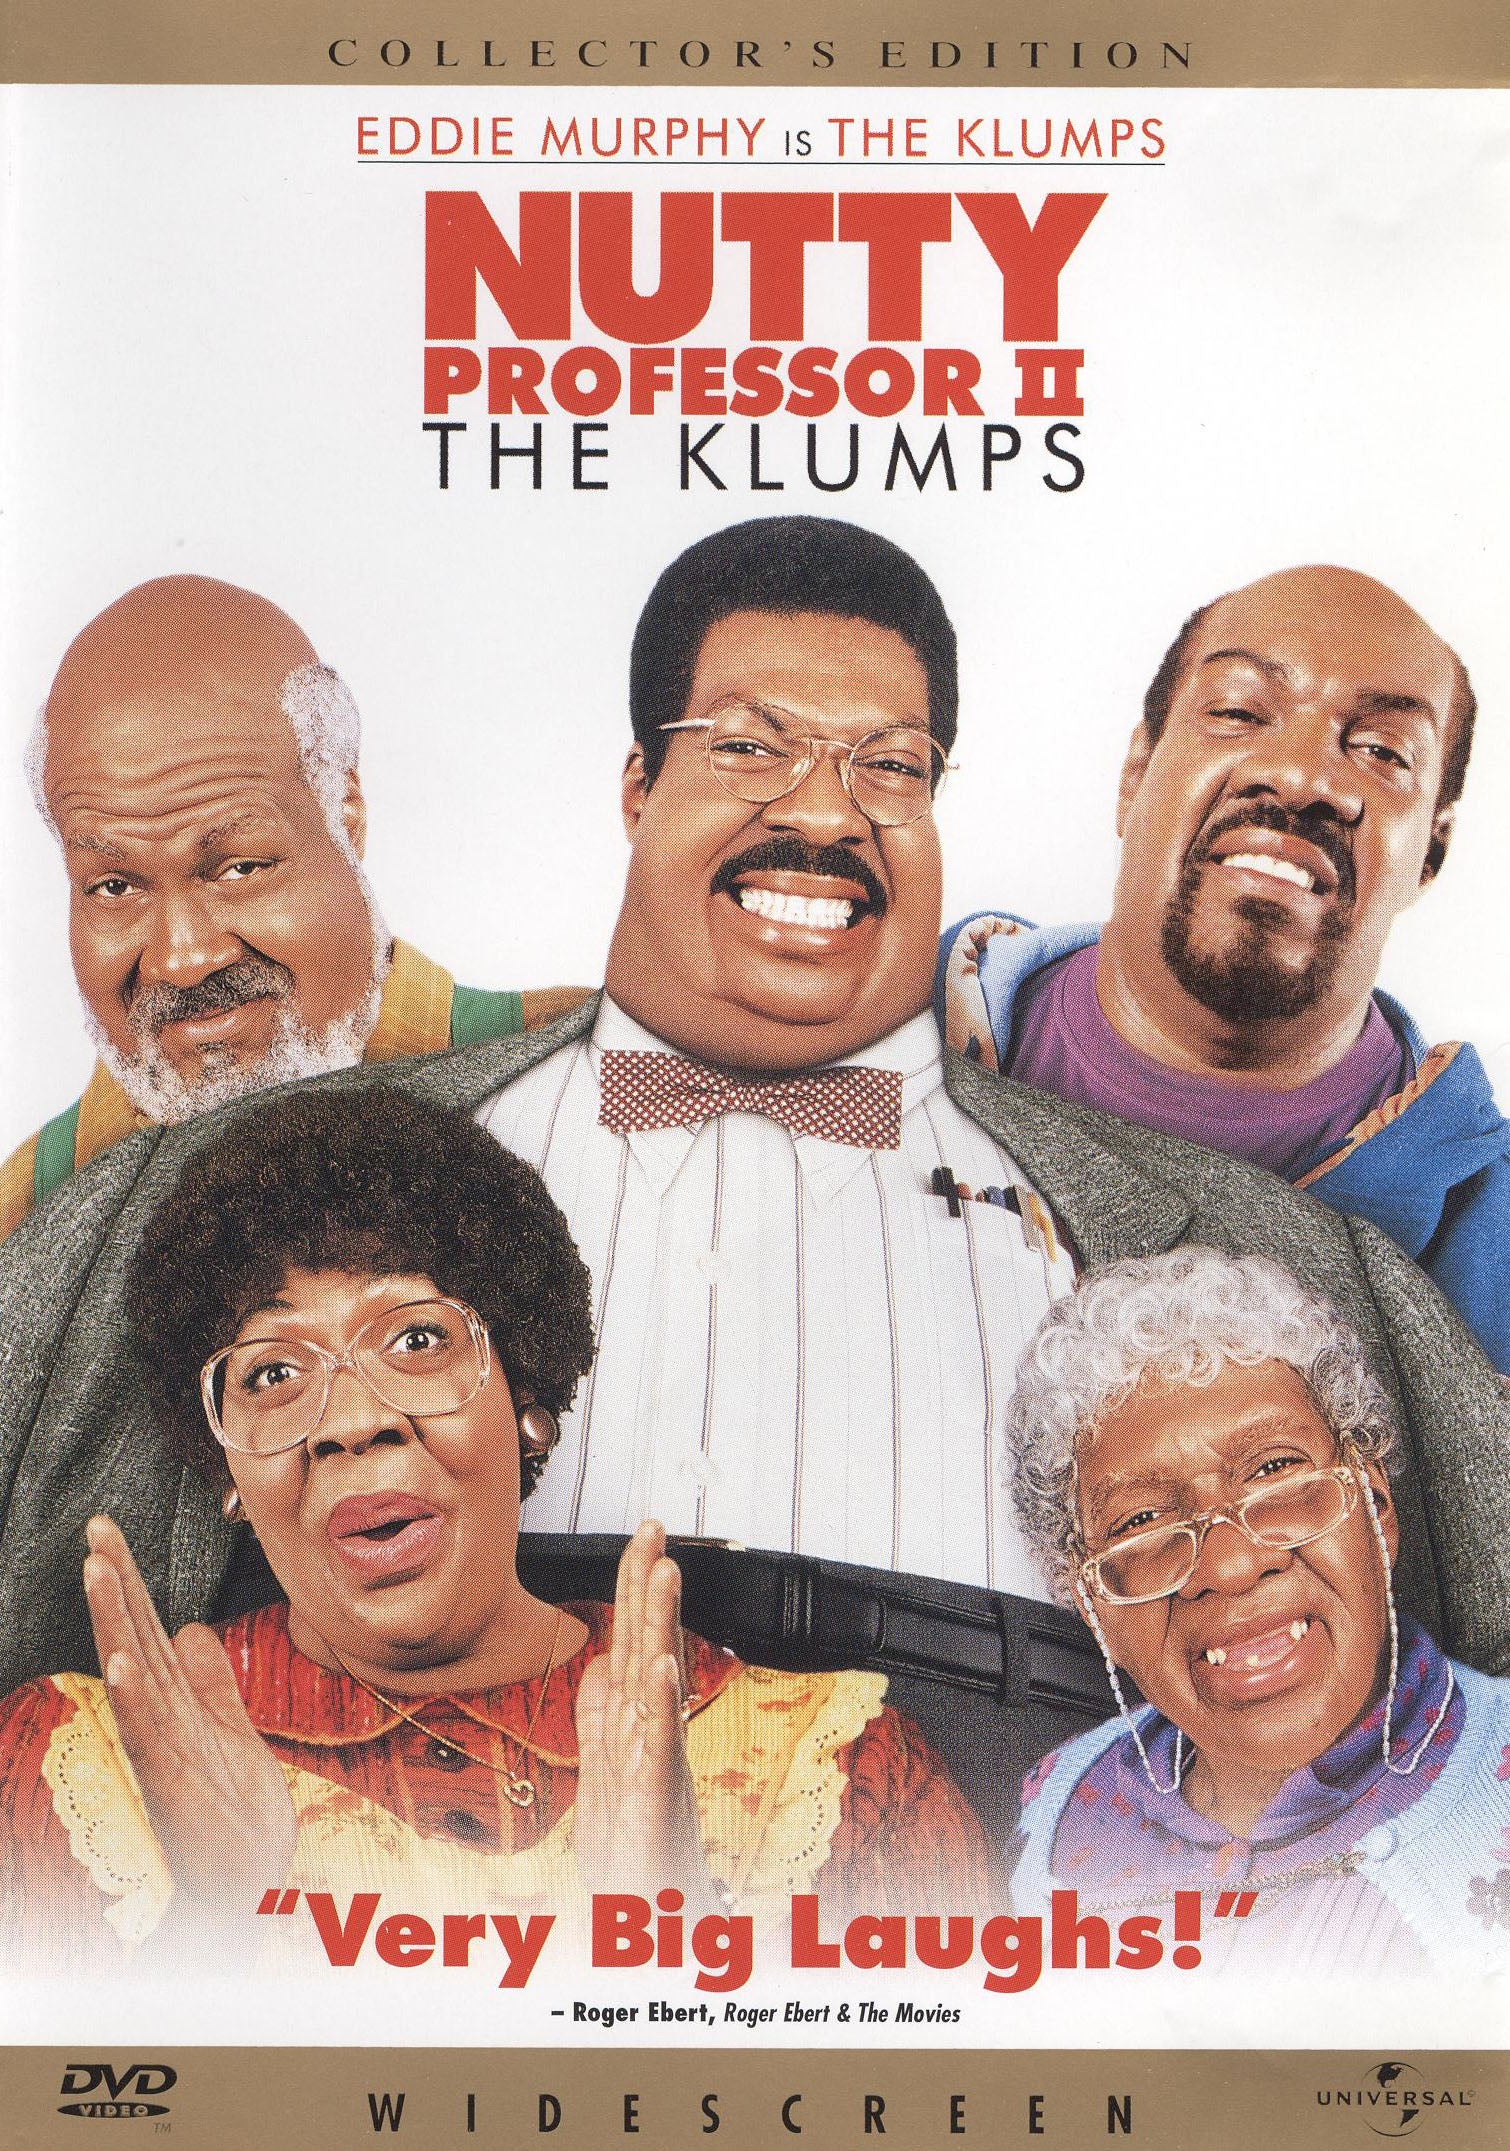 Nutty Professor II: The Klumps [Collector's Edition] cover art